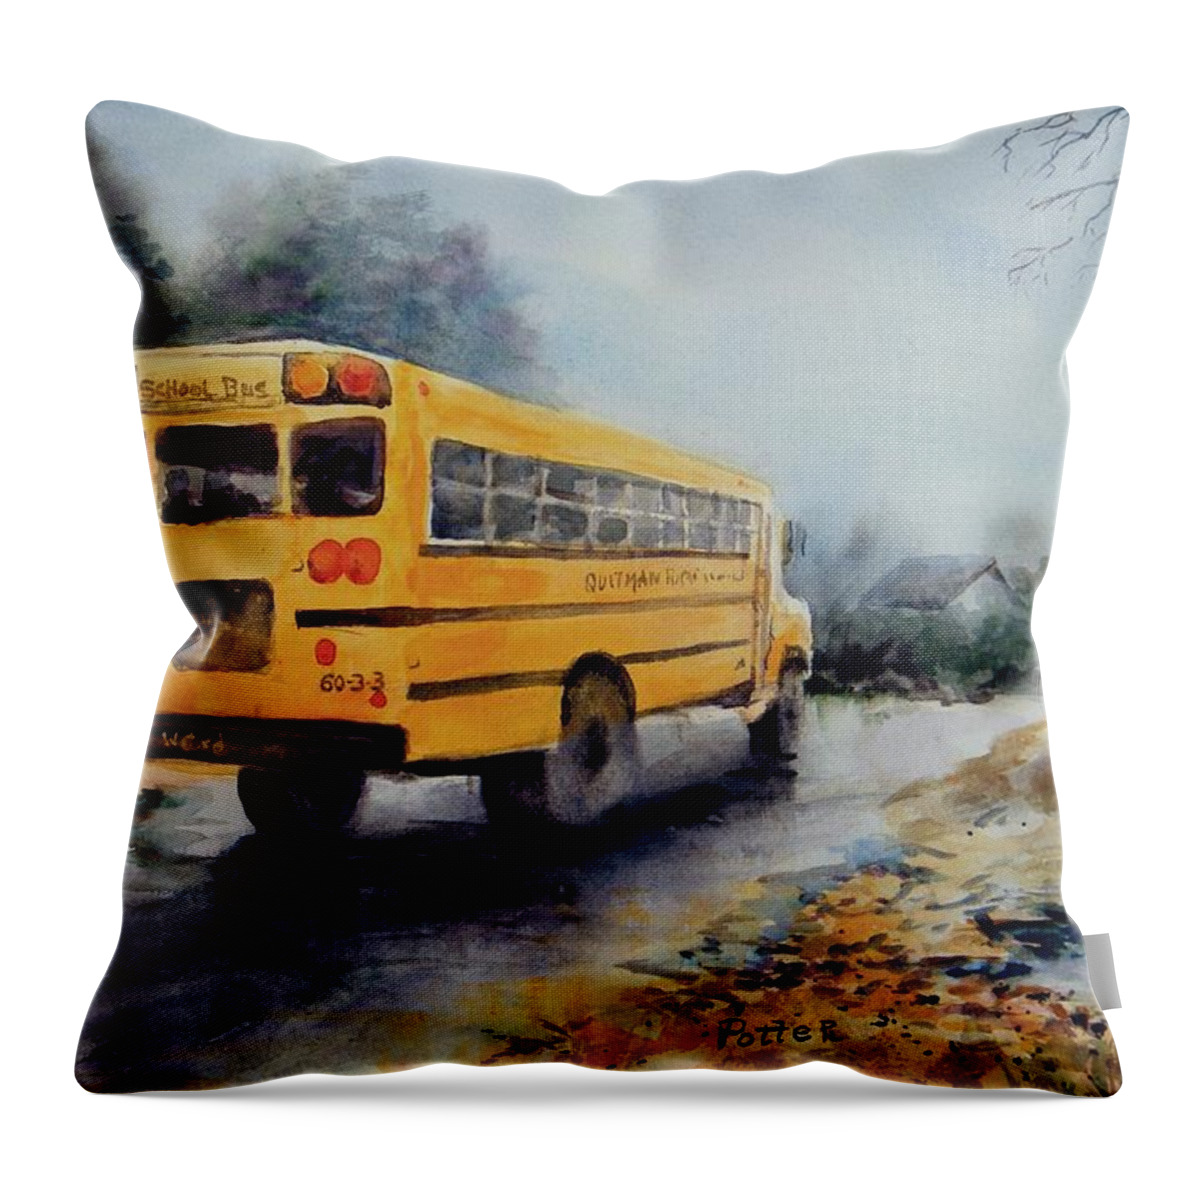 Watercolor Throw Pillow featuring the painting Old Number Three by Virginia Potter